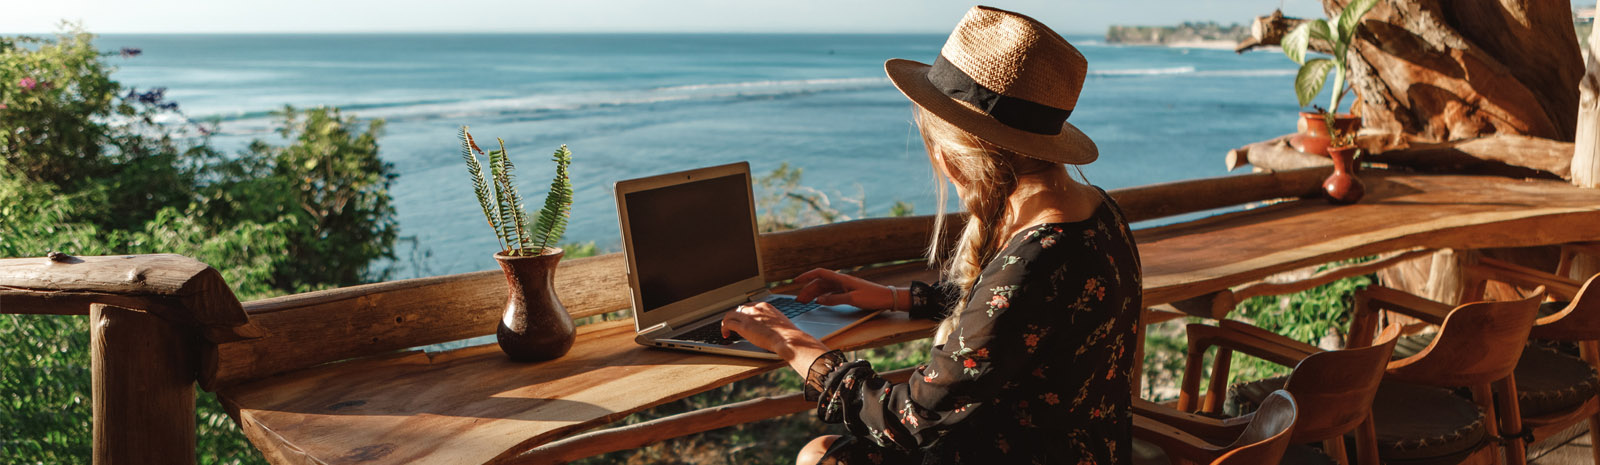 Young woman working on a laptop sits at a wooden bar overlooking the ocean.